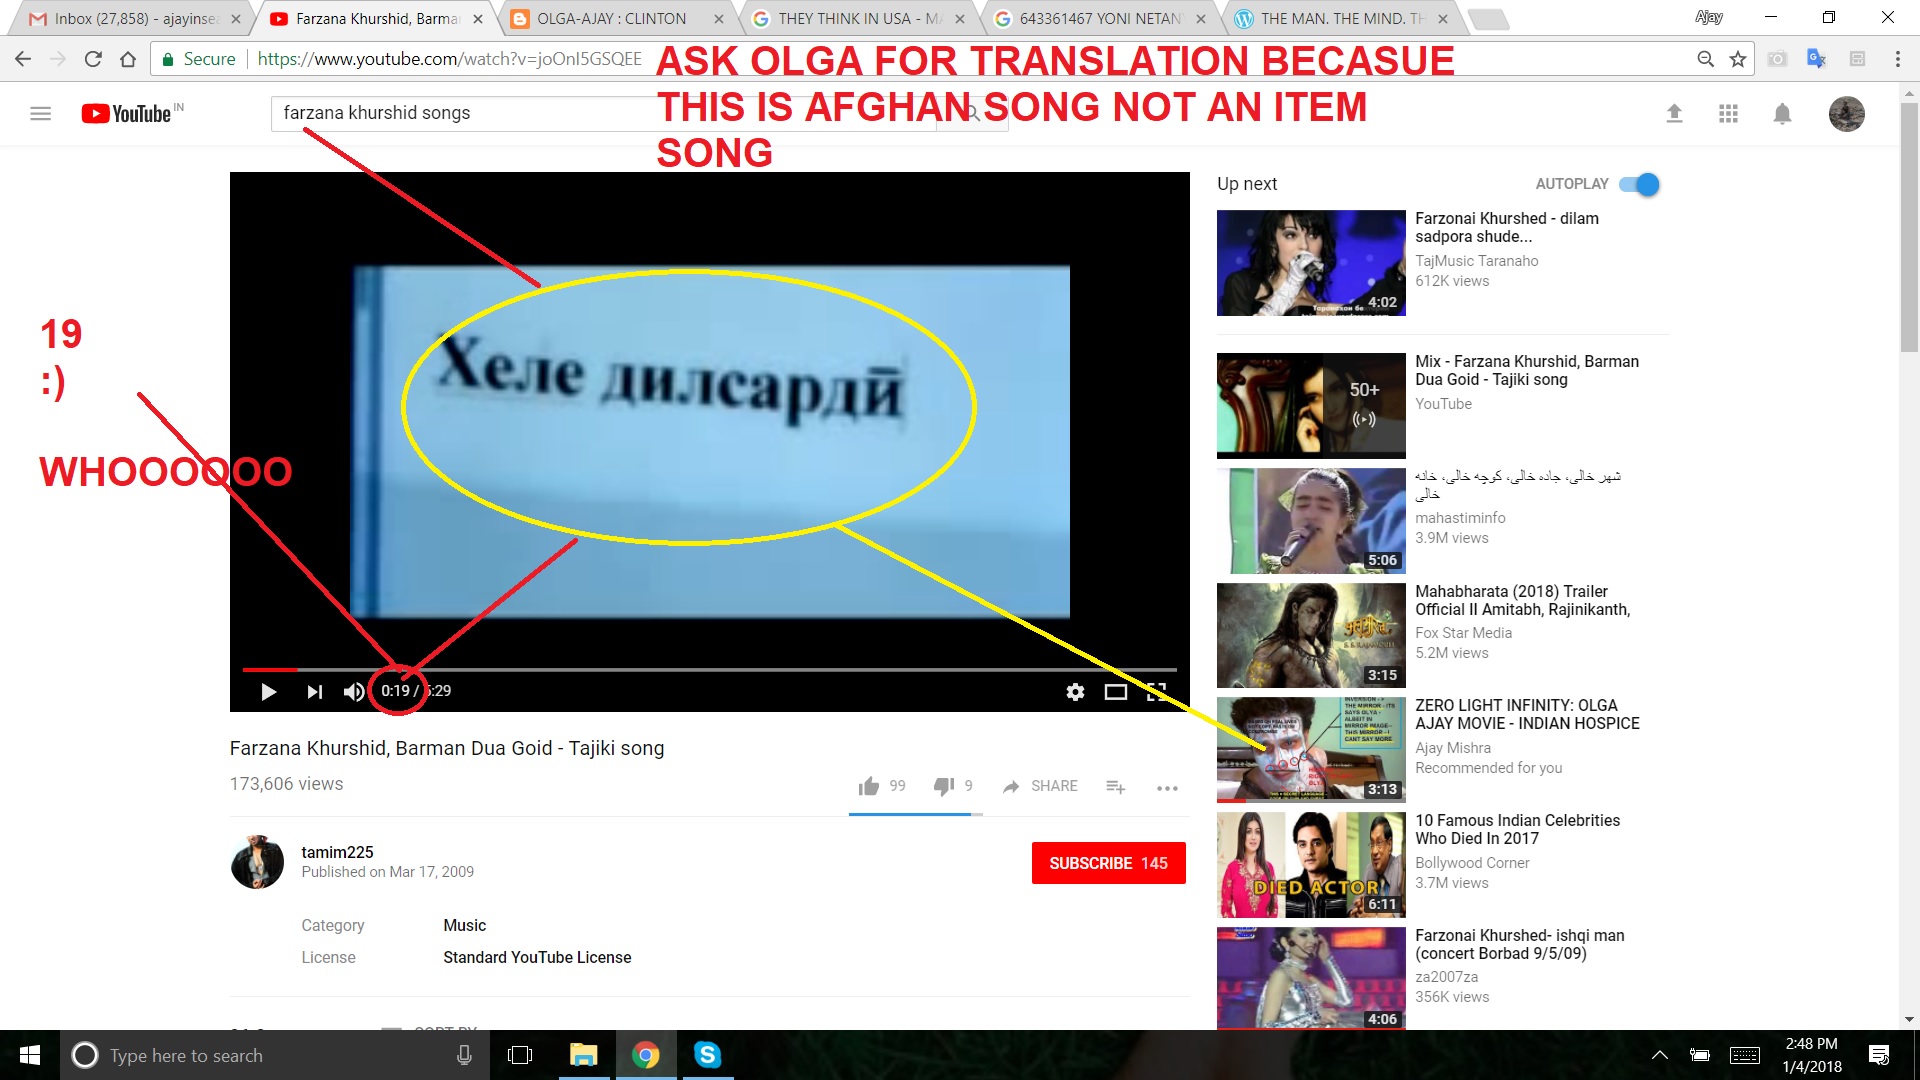 OLGA FARZANA SONG -ASK OLGA FOR TRANSLATION BECAUSE THIS IS AFGHAN SONG NOT AN ITEM SONG